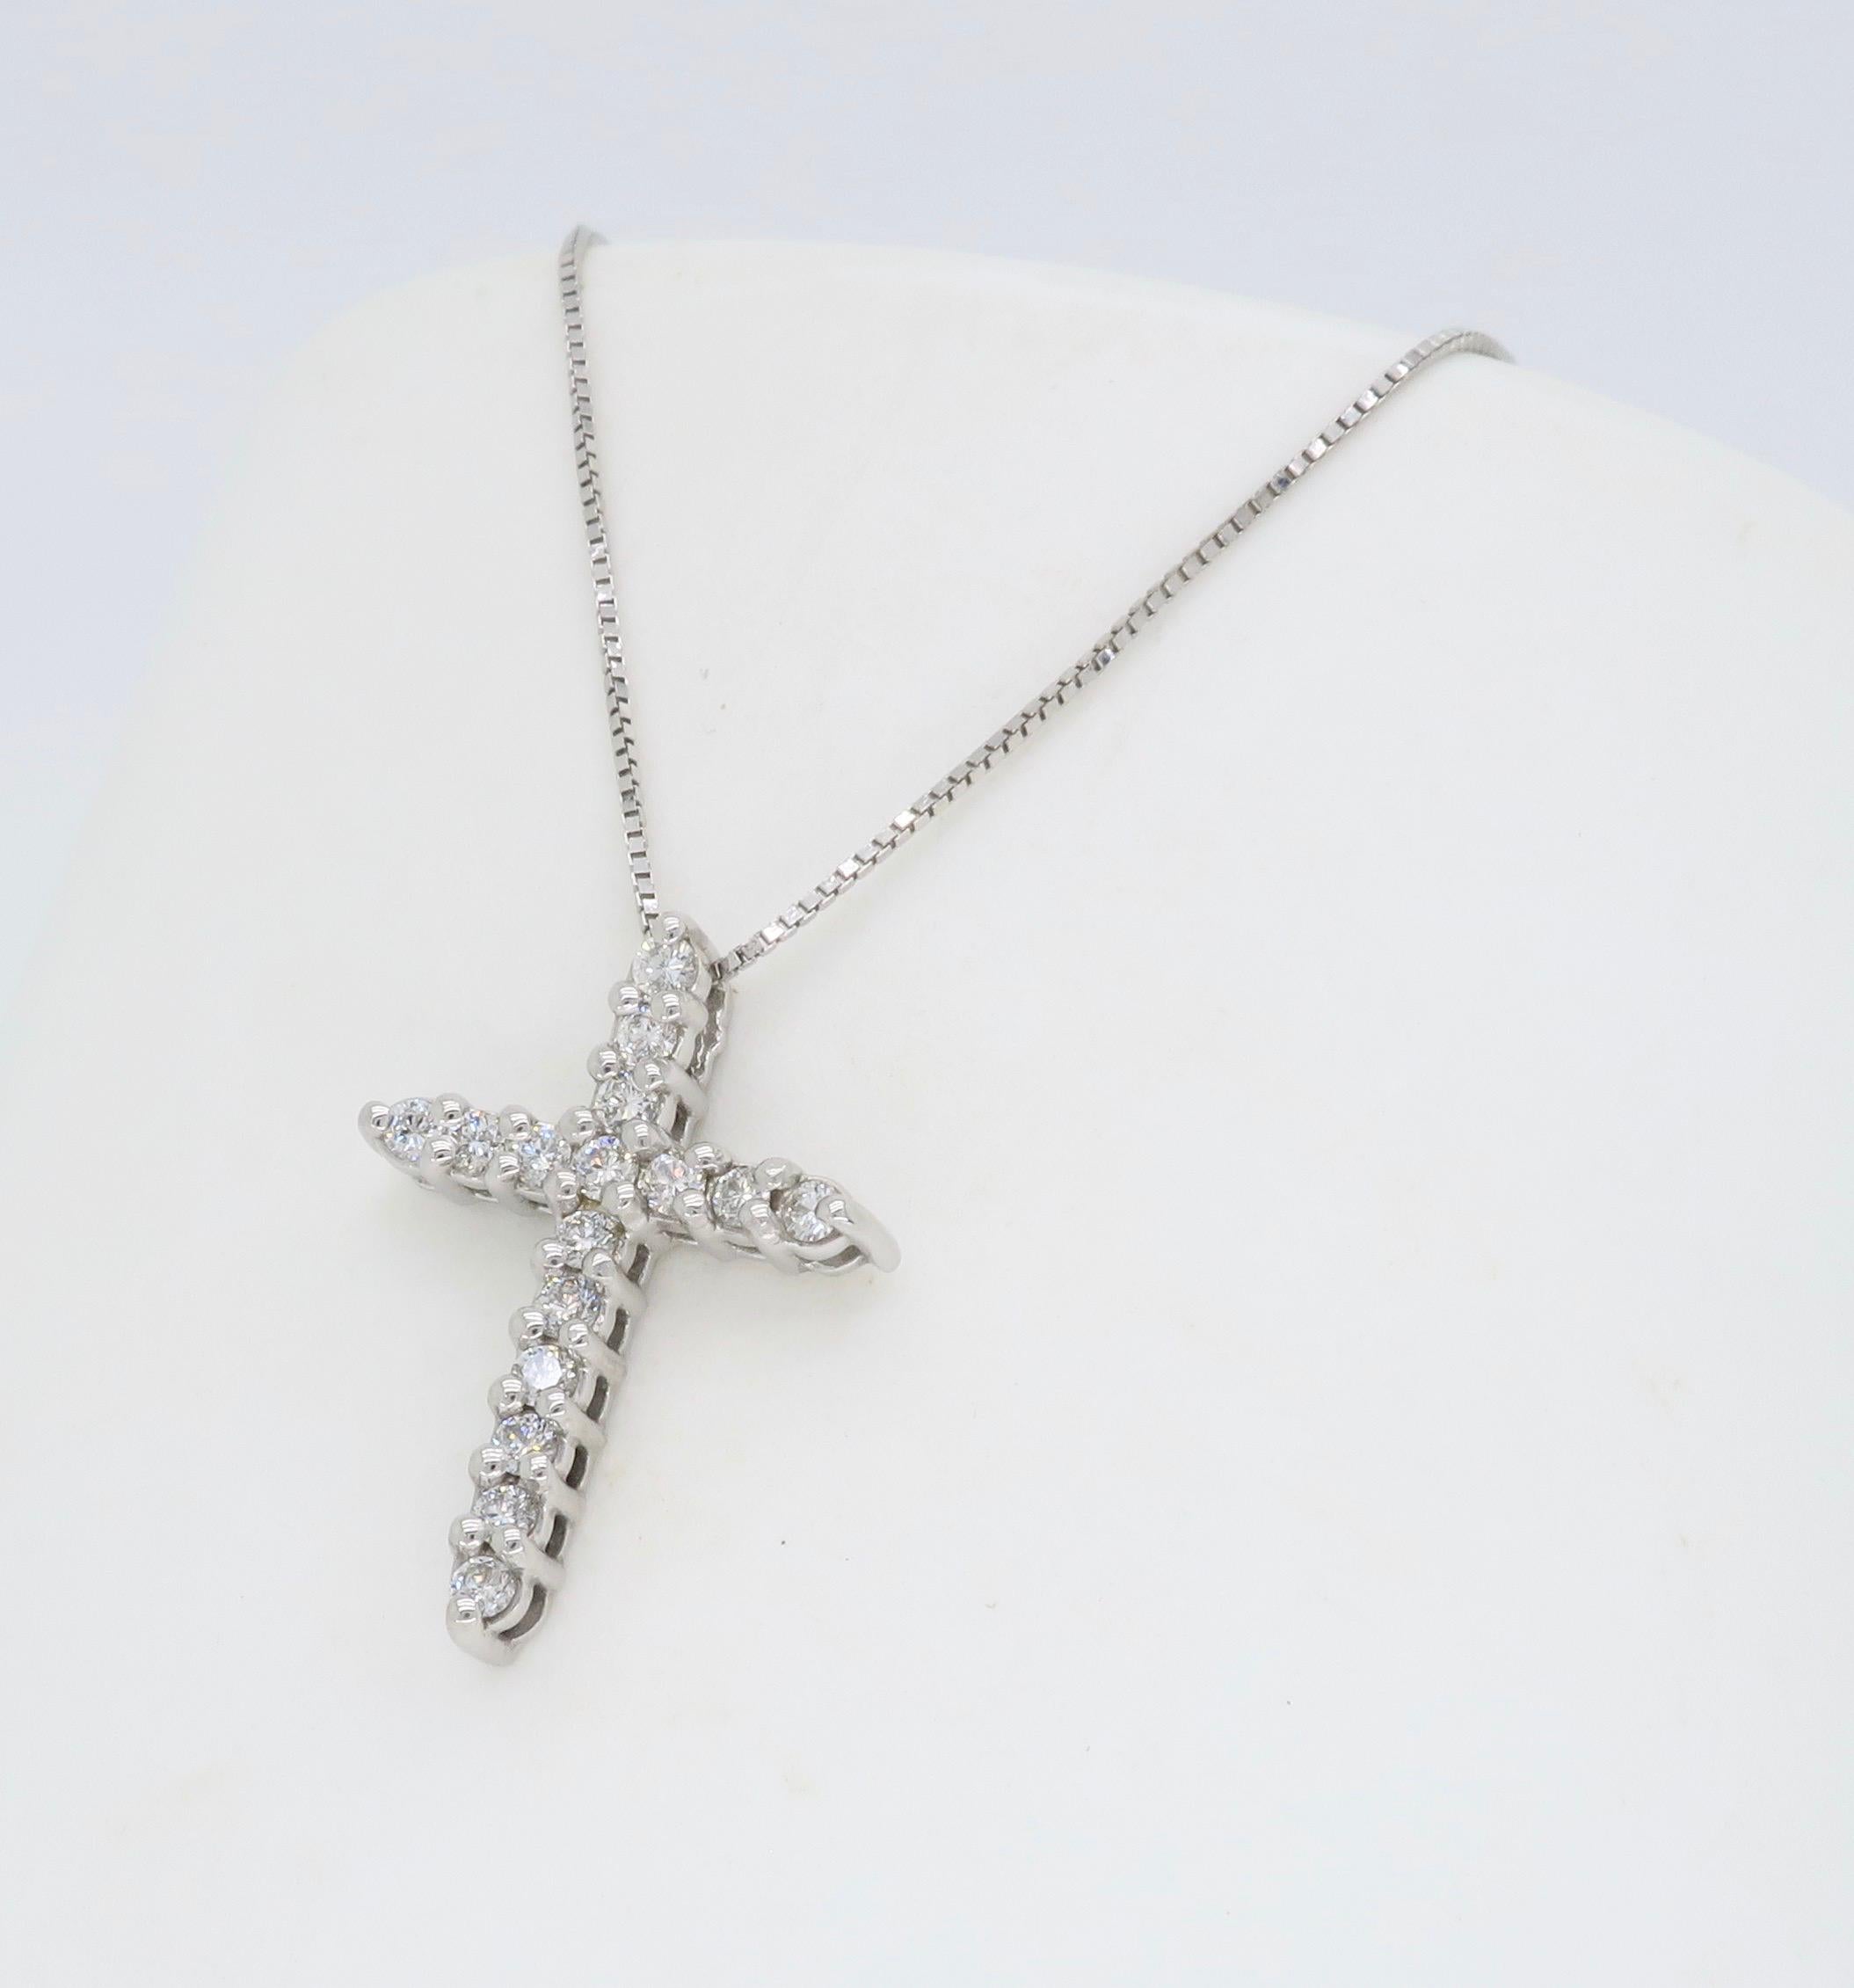 Approximately .25CTW diamond cross pendant necklace crafted in 14k white gold.

Diamond Carat Weight: Approximately .25CTW
Diamond Cut: Round Brilliant Cut Diamonds
Color: Average G-J
Clarity: Average SI-I
Metal: 14K White Gold
Marked/Tested: Tested